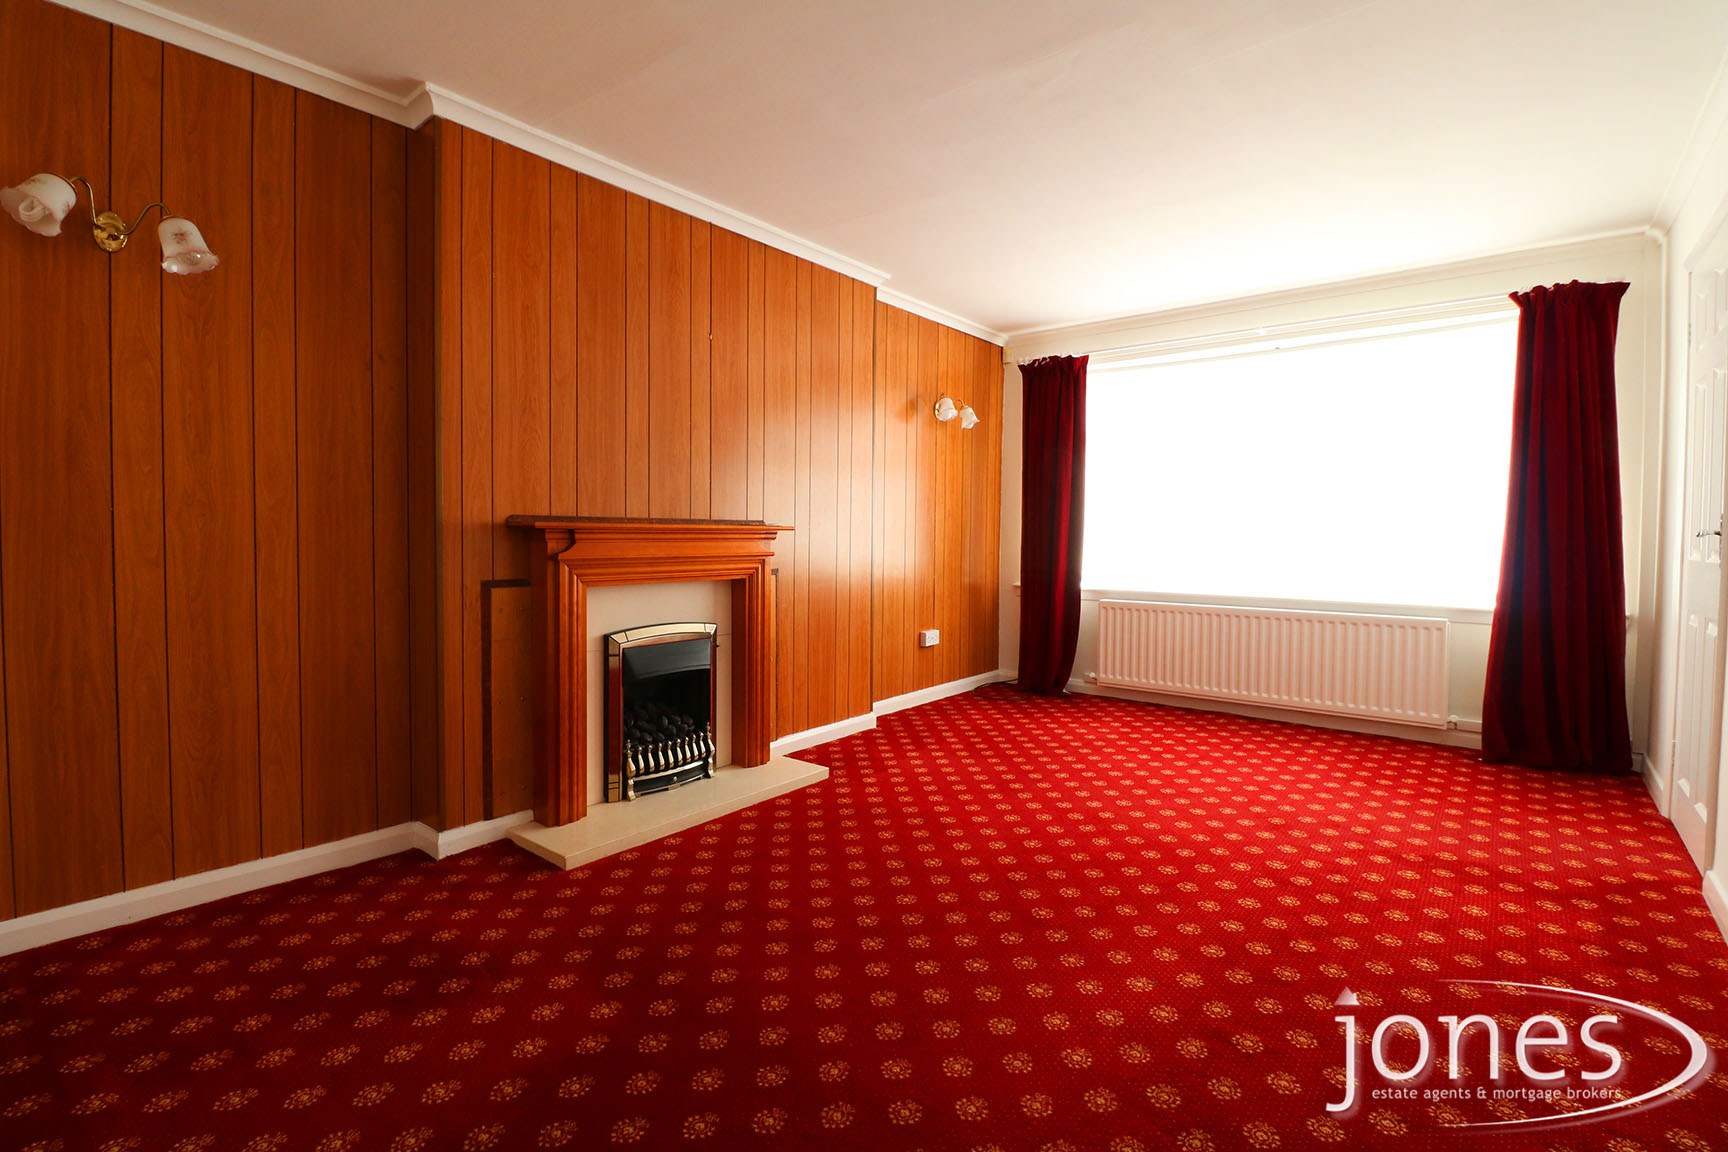 Home for Sale Let - Photo 02 Sycamore Road, Stockton on Tees, TS19 0NB